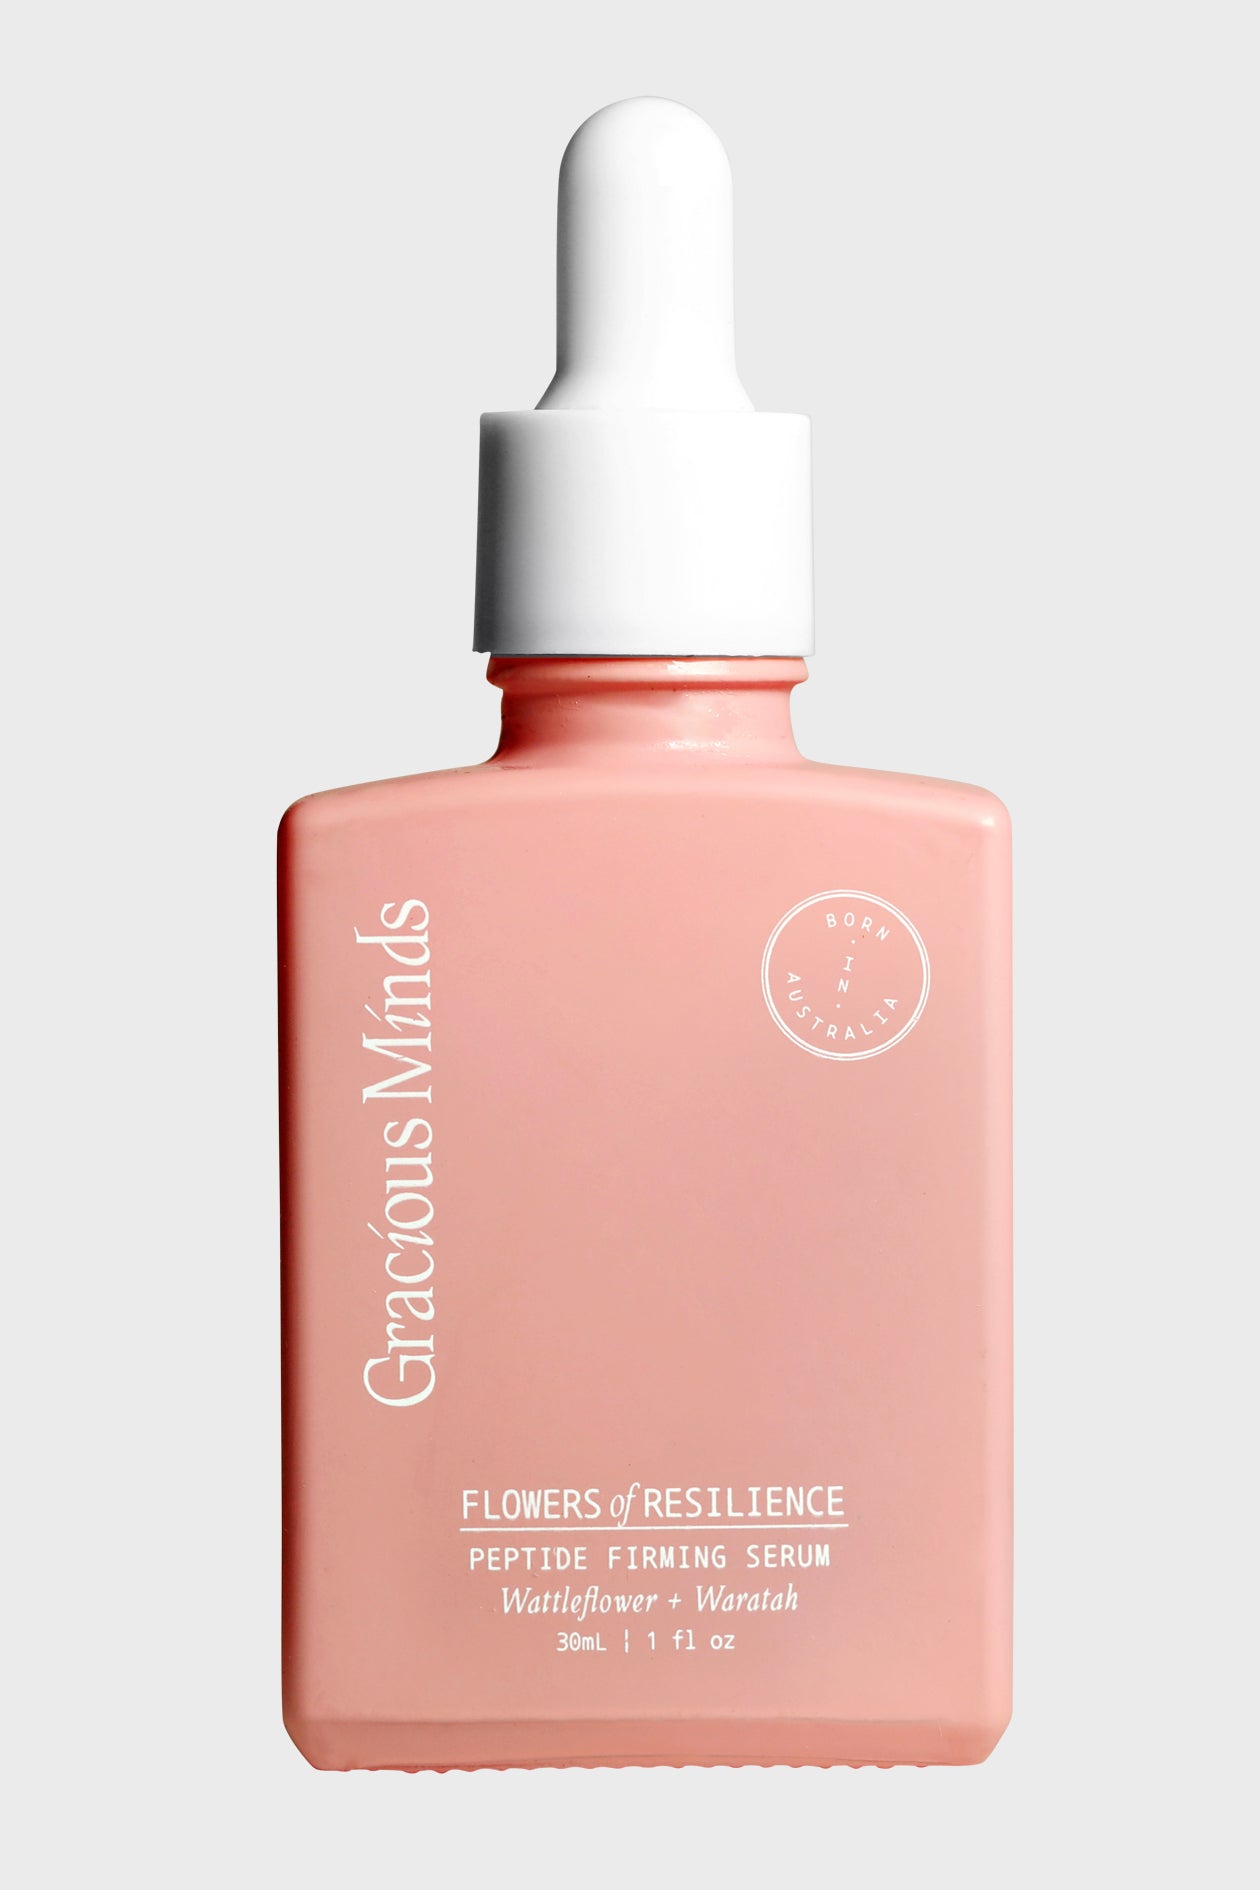 Flowers of Resilience Peptide Firming Serum